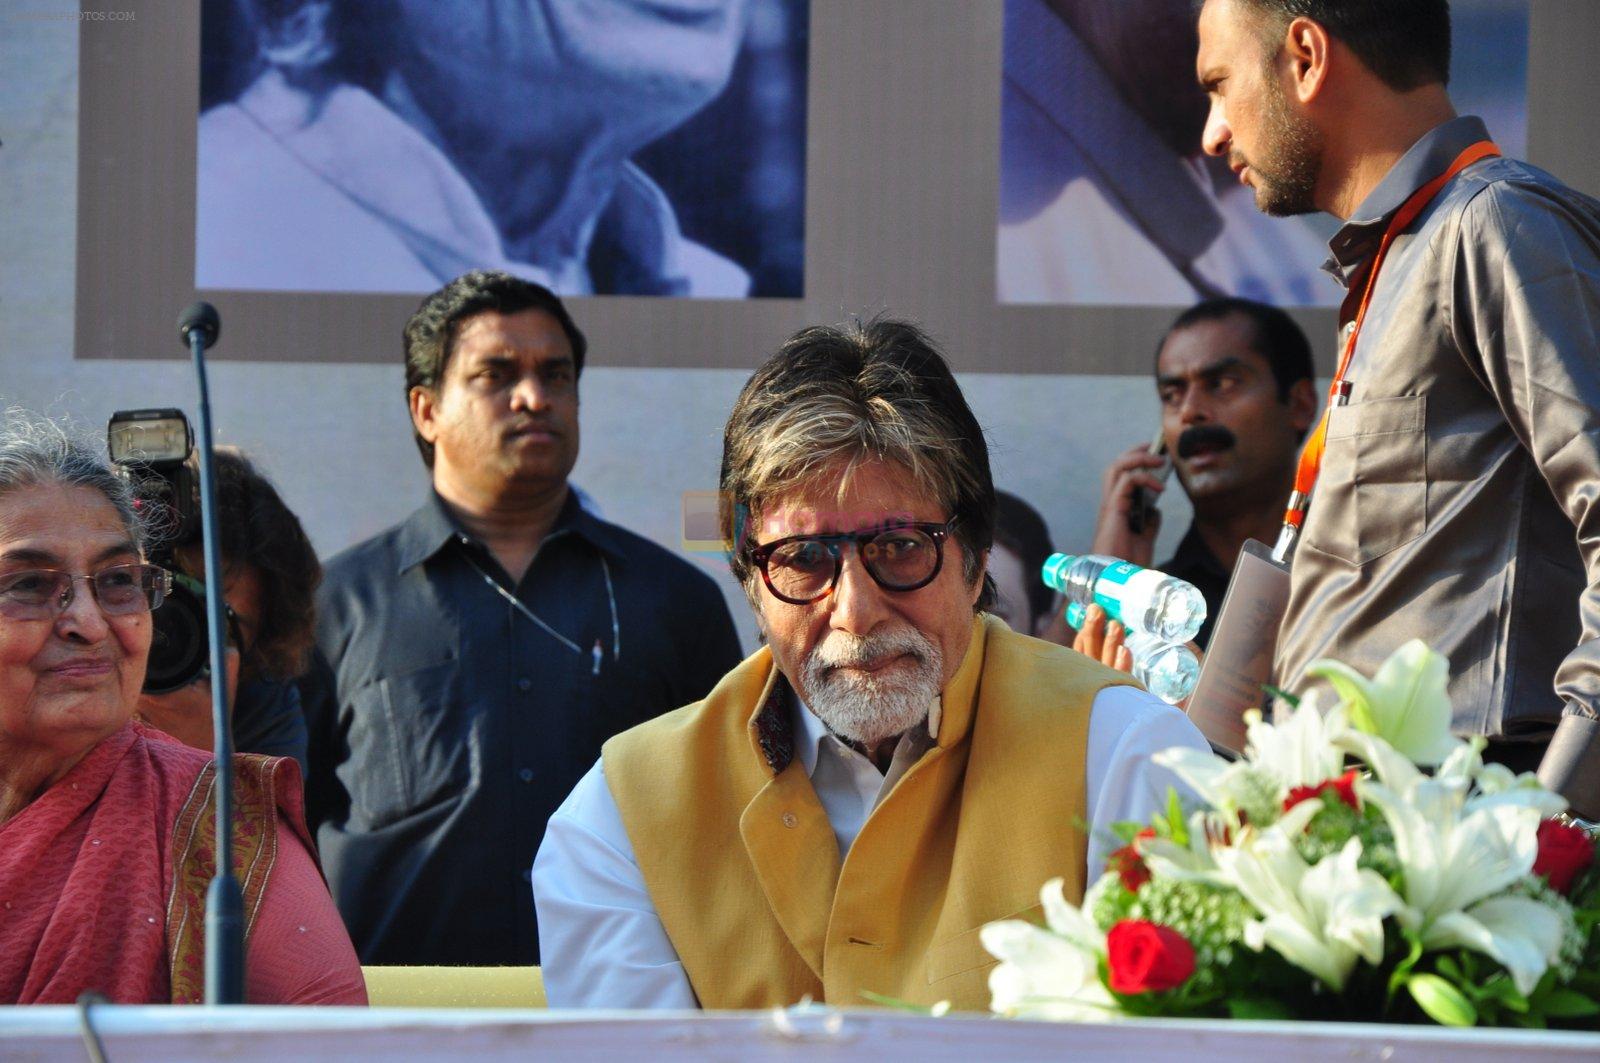 Amitabh Bachchan at an Event on 30th April 2016